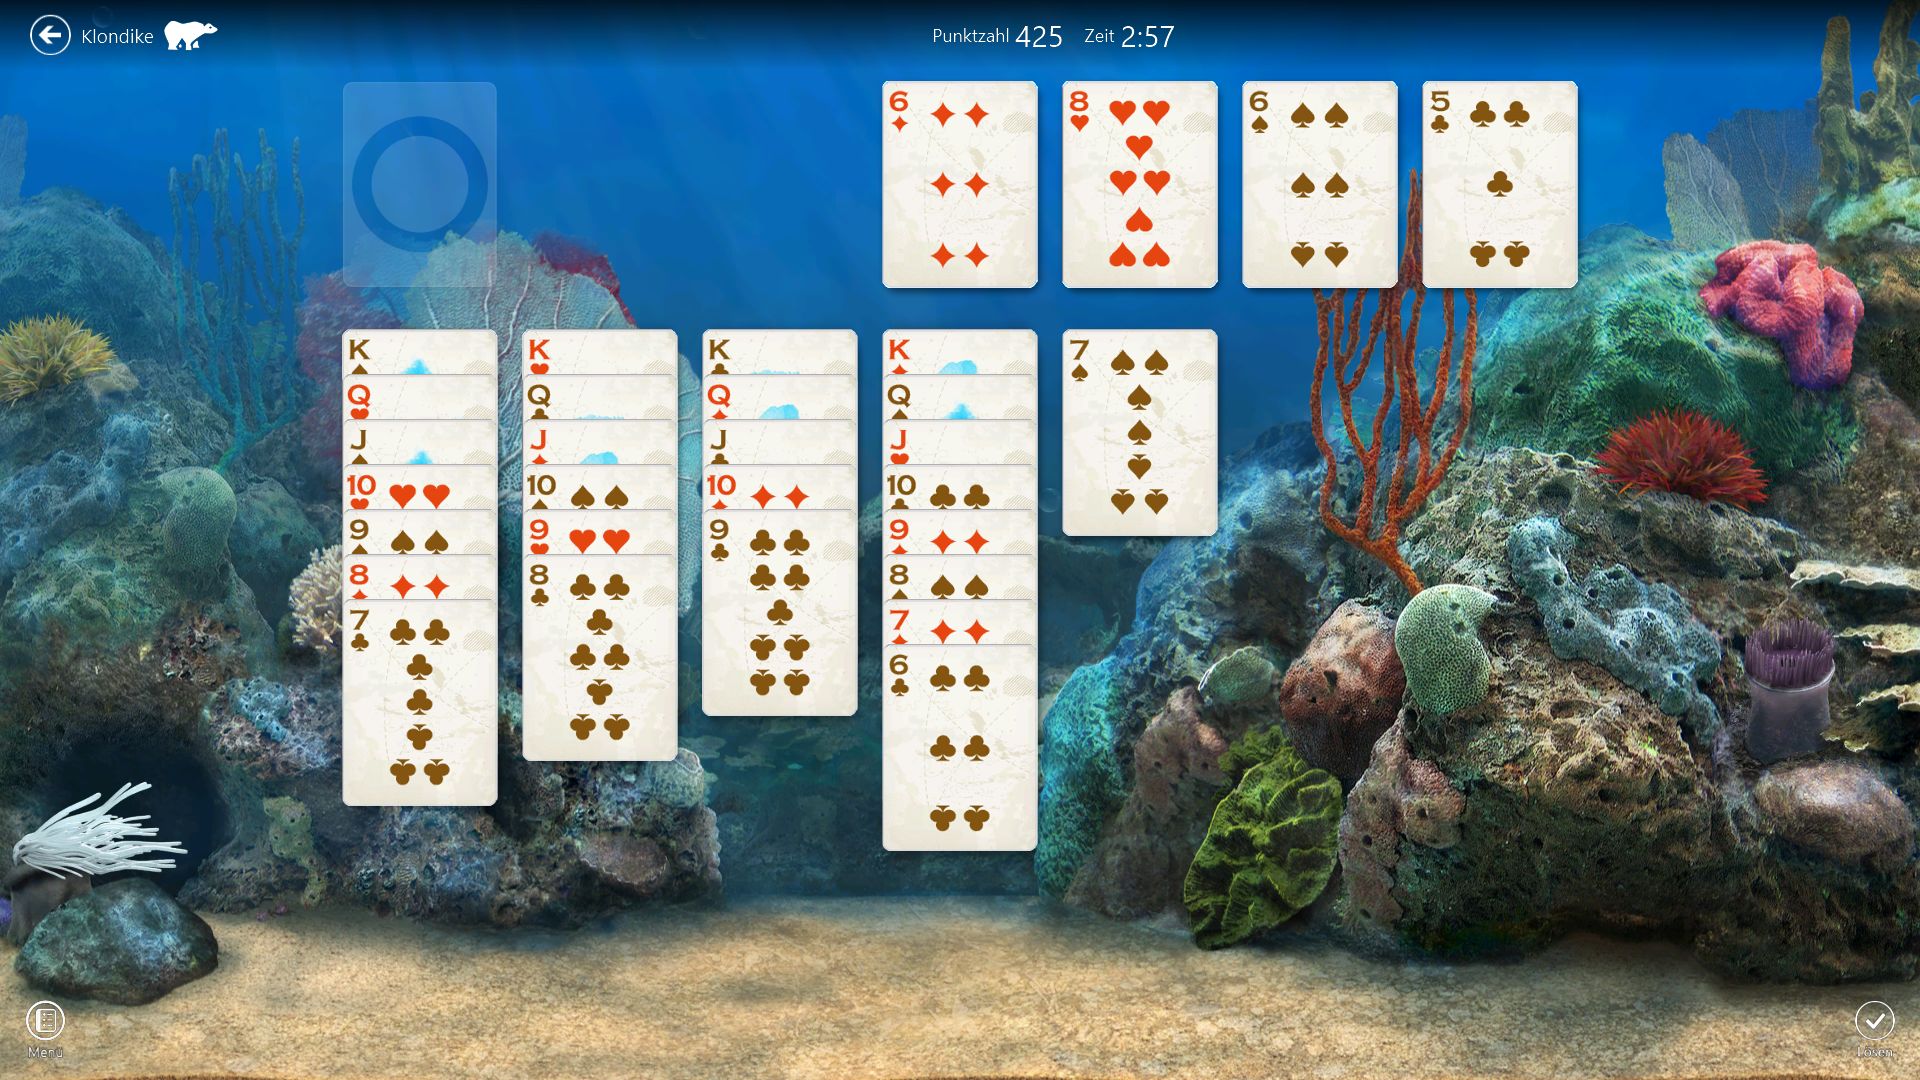 microsoft solitaire collection windows 8.1 not working